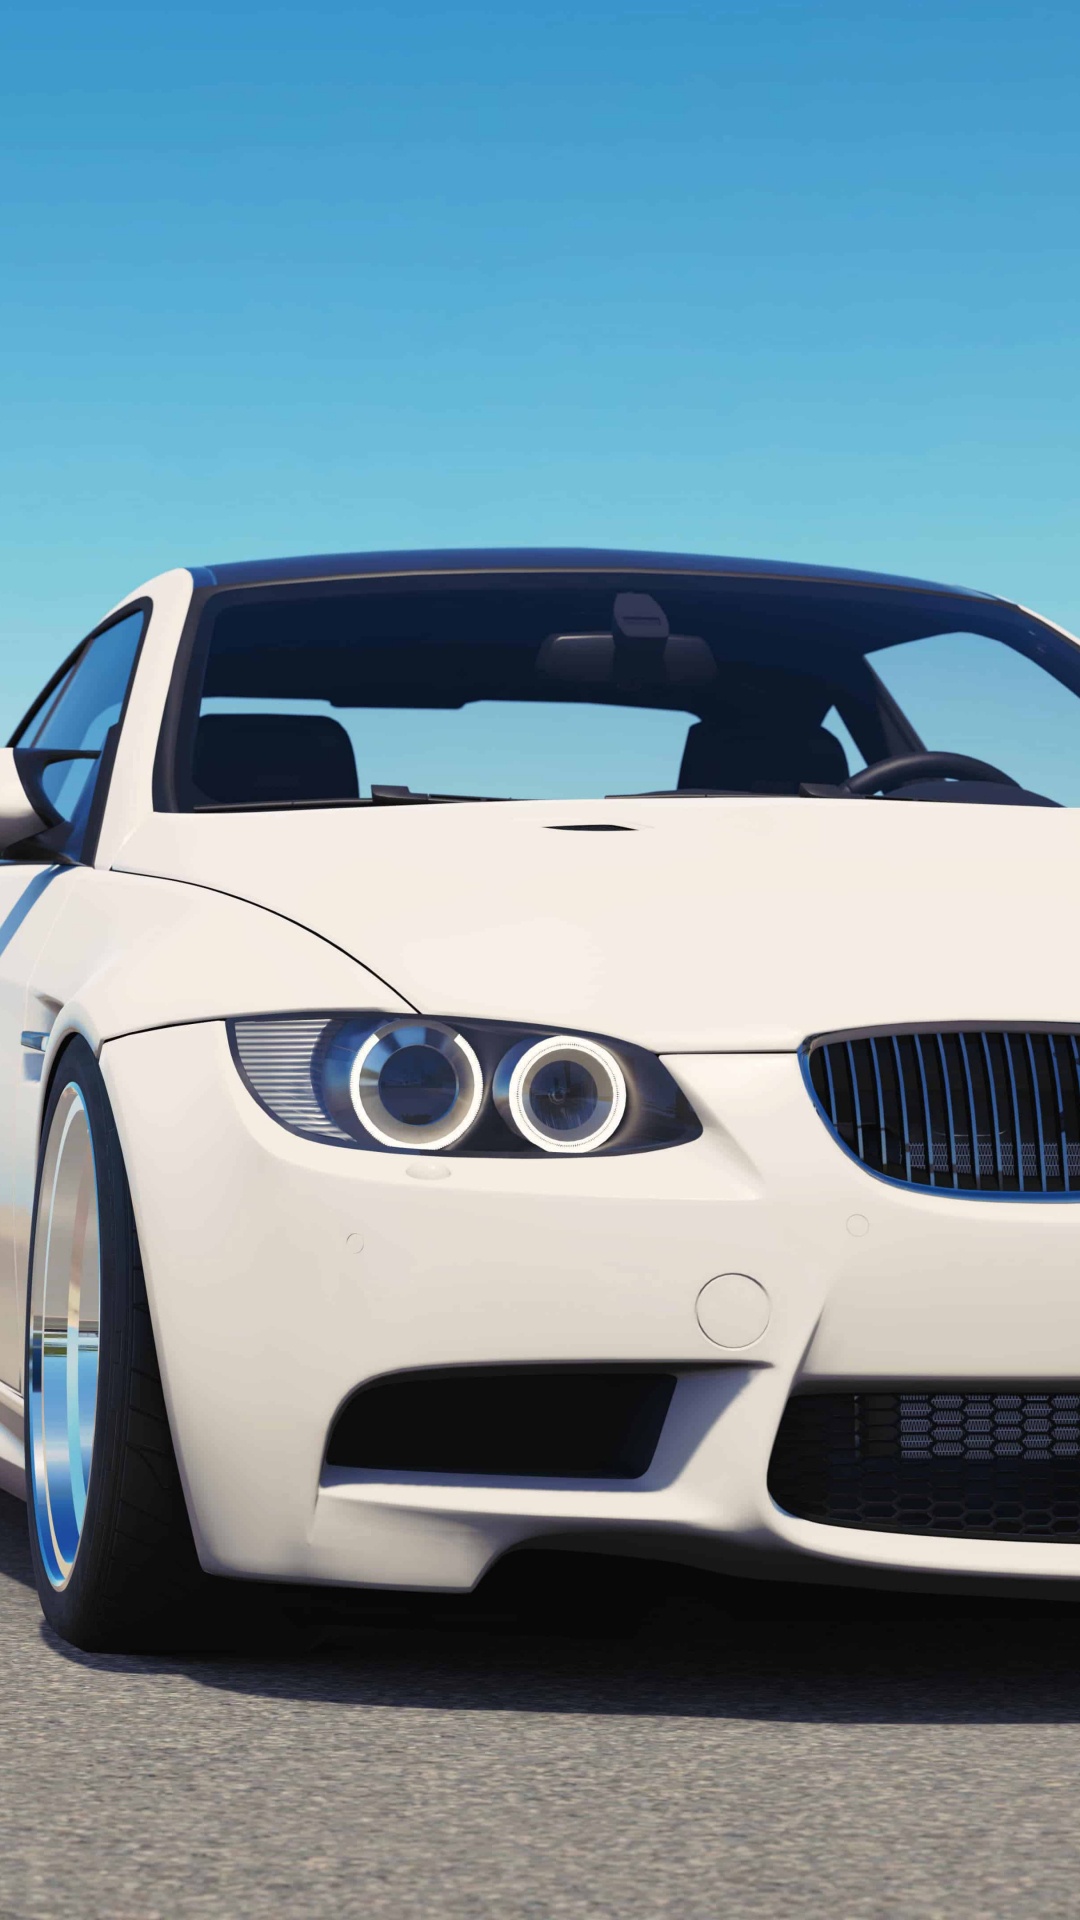 White Bmw m 3 Coupe Parked on Gray Asphalt Road During Daytime. Wallpaper in 1080x1920 Resolution